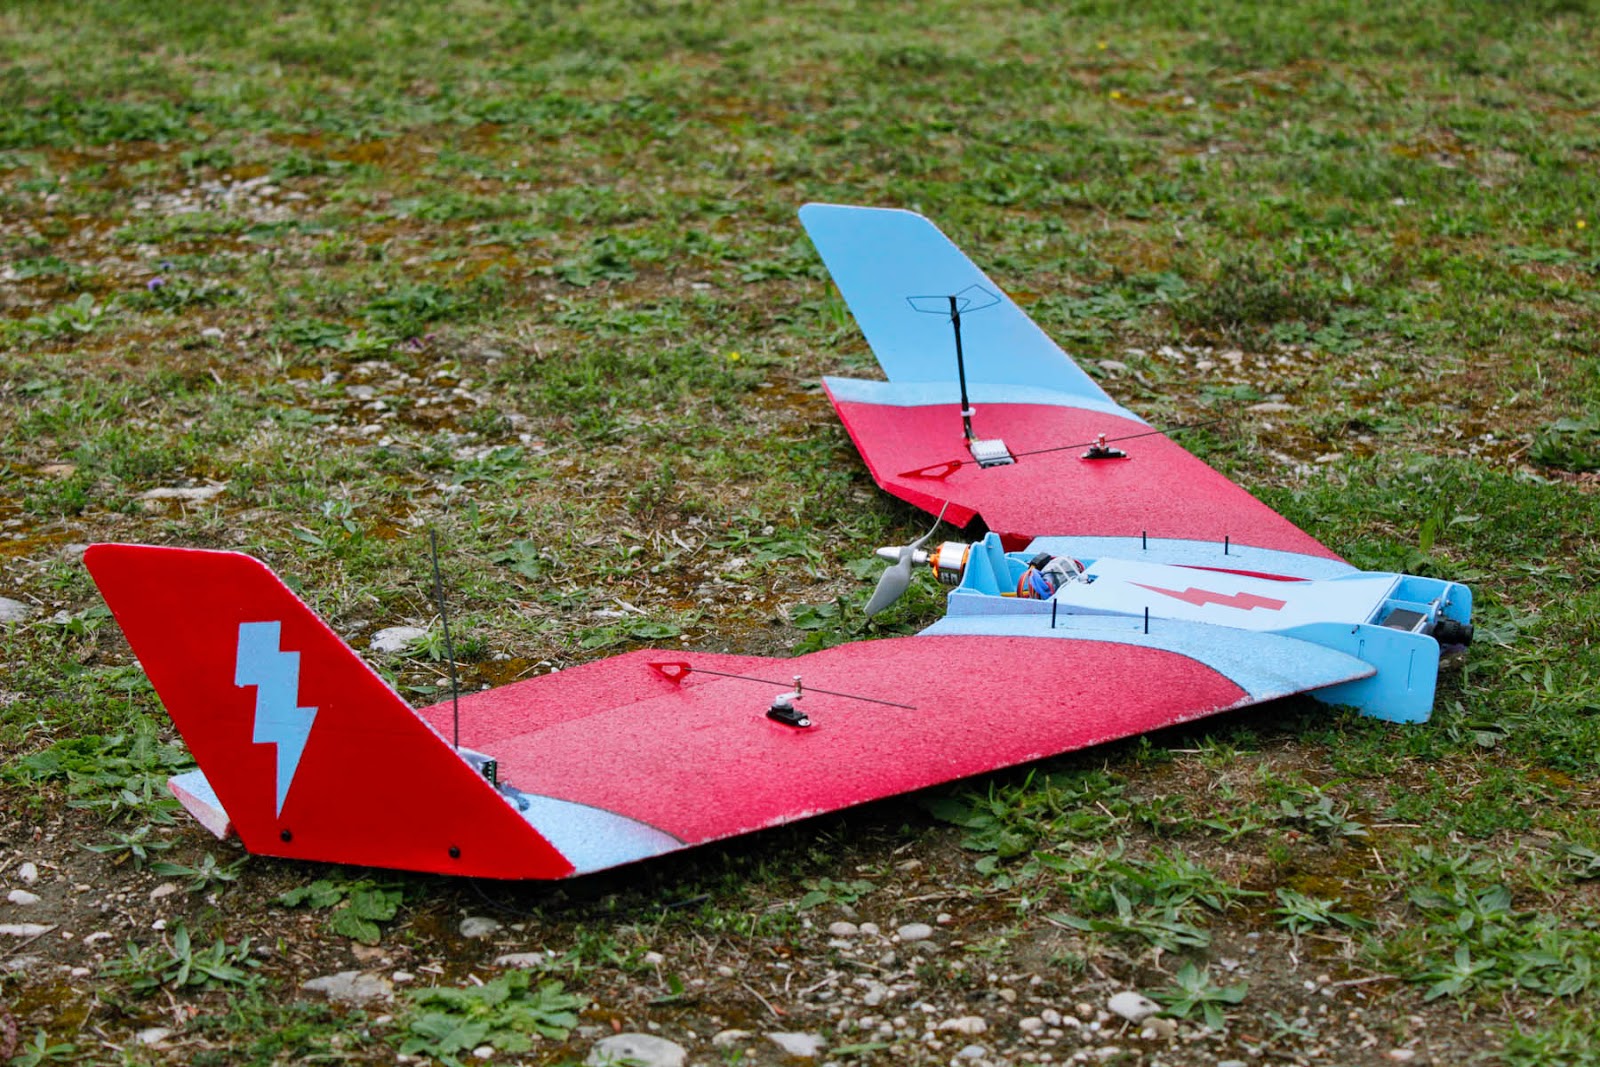 How to build Long range FPV aircraft